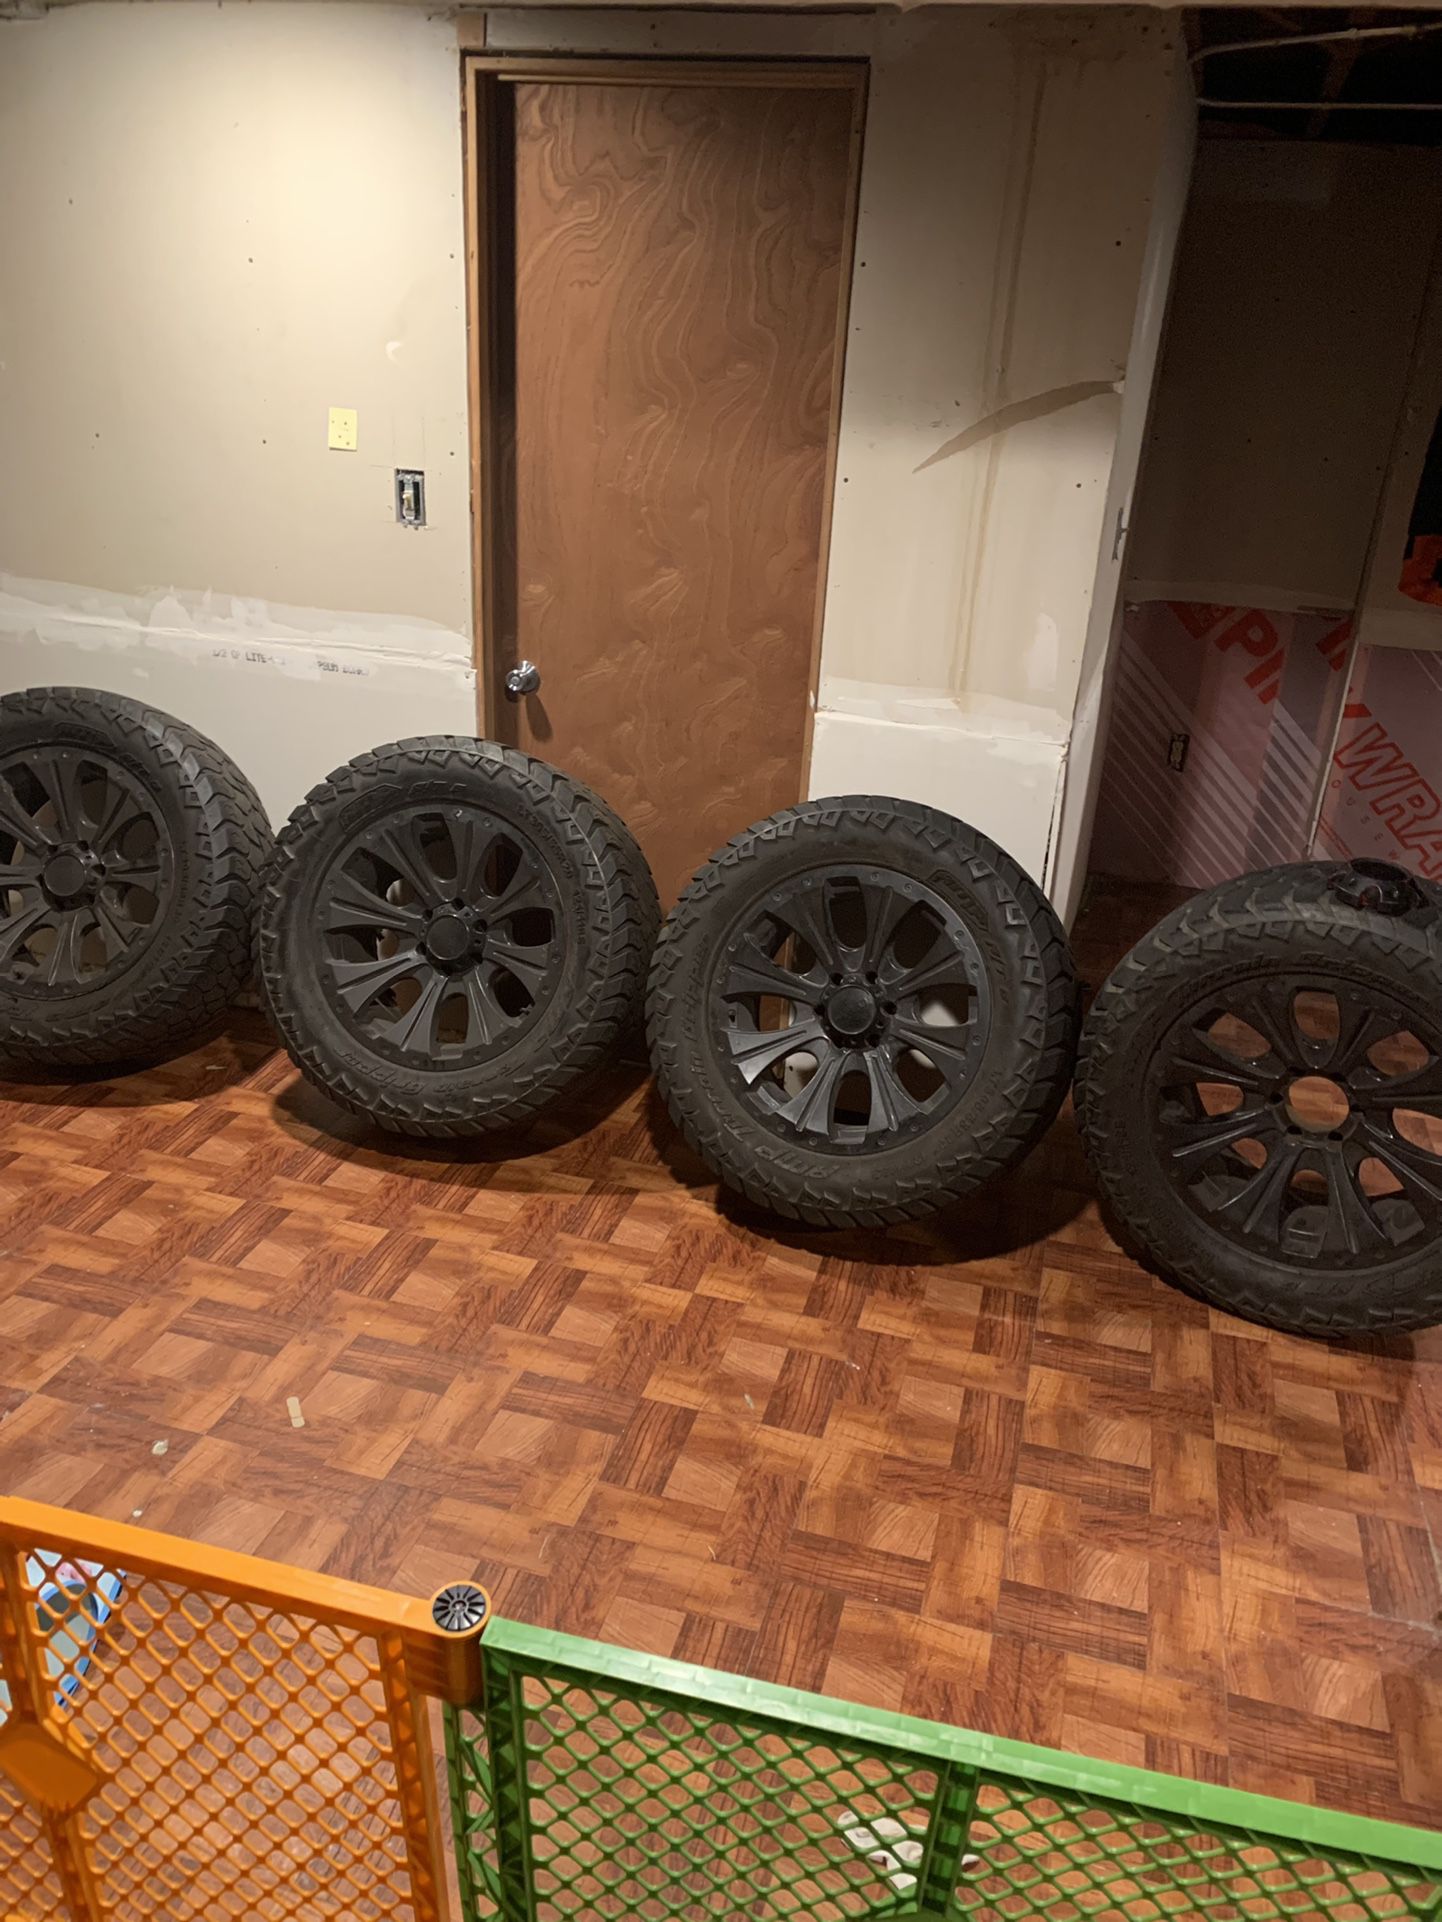 Mudders. 6 Lug 305 55 R20/ 33s On 20 Inch Rims. . Come Off Chevy Suburban . Originally Was Red. I Painted Them Black. 600.